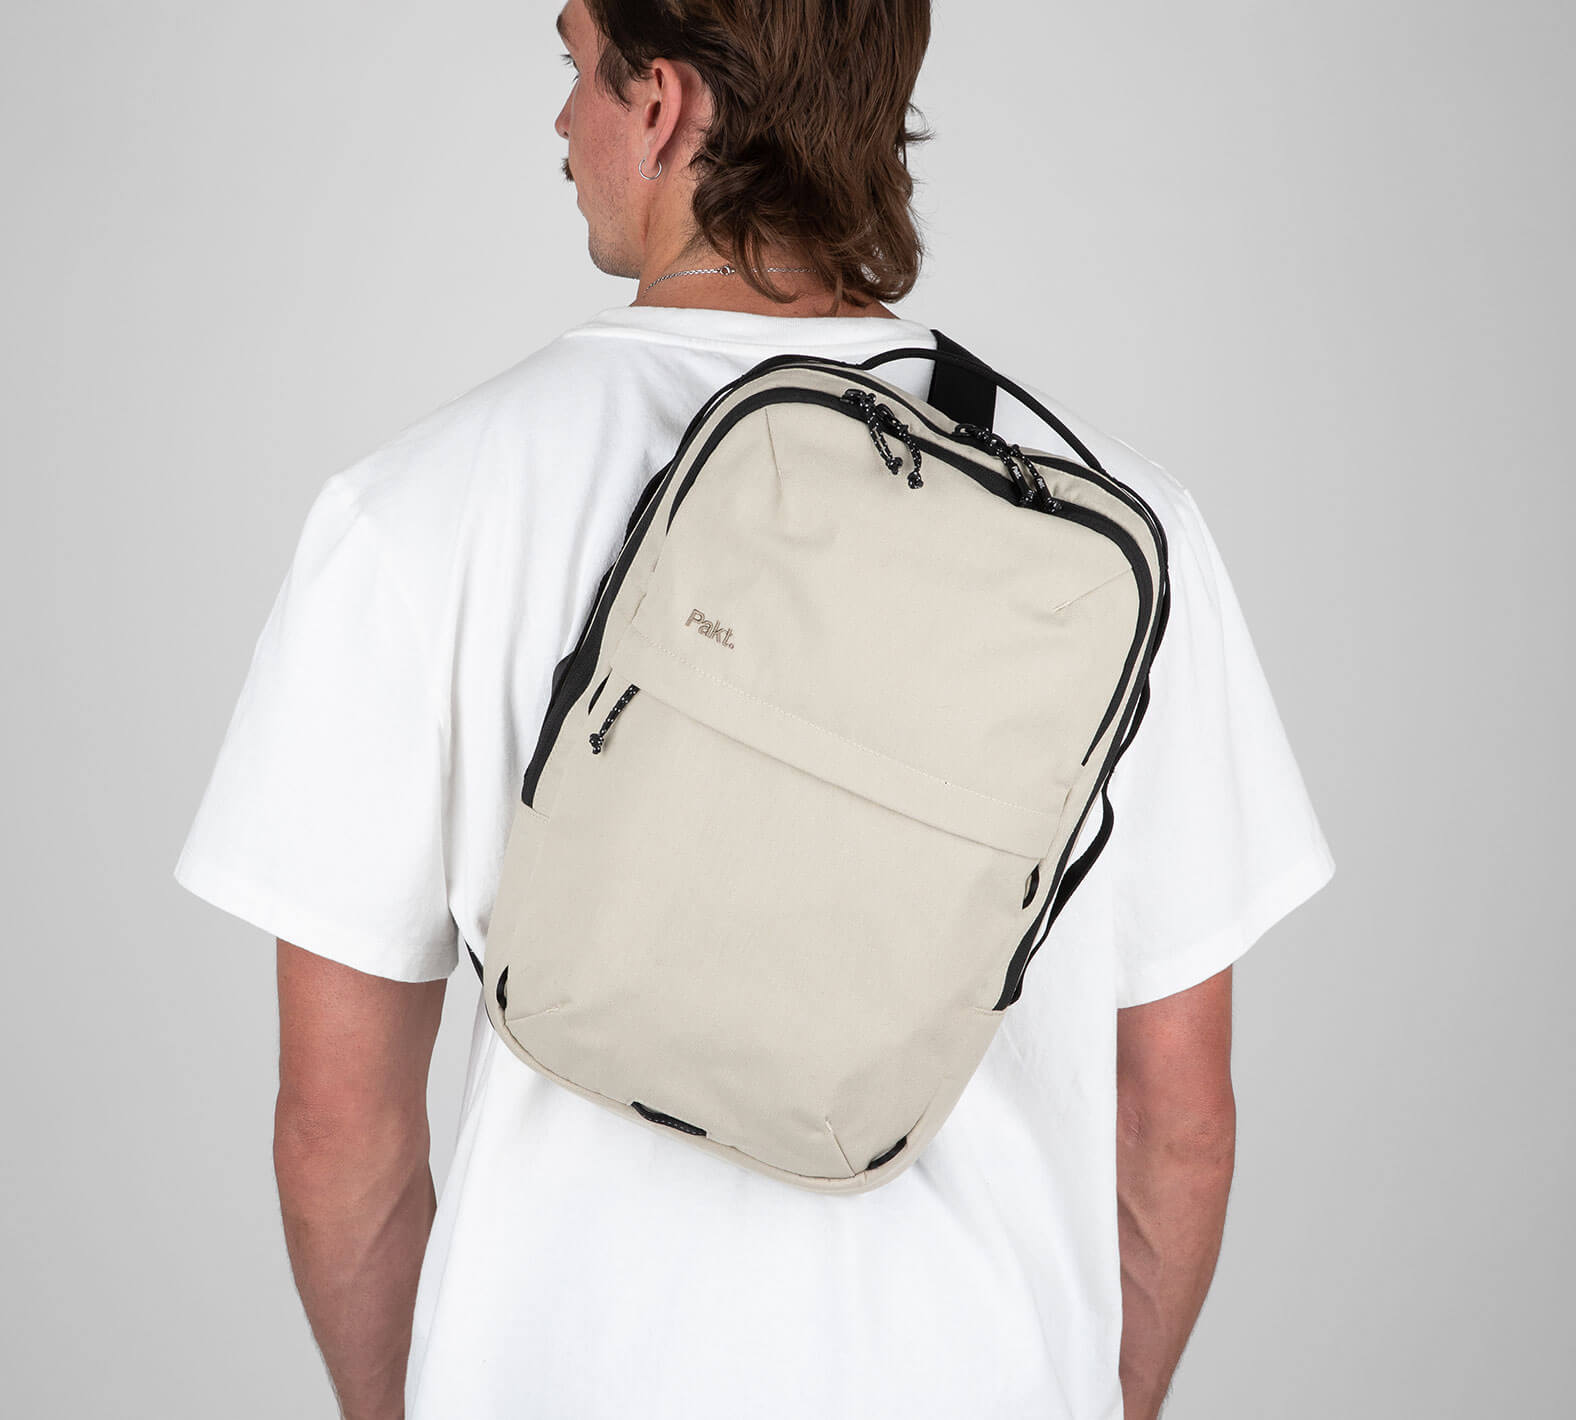 Man with tan sling backpack